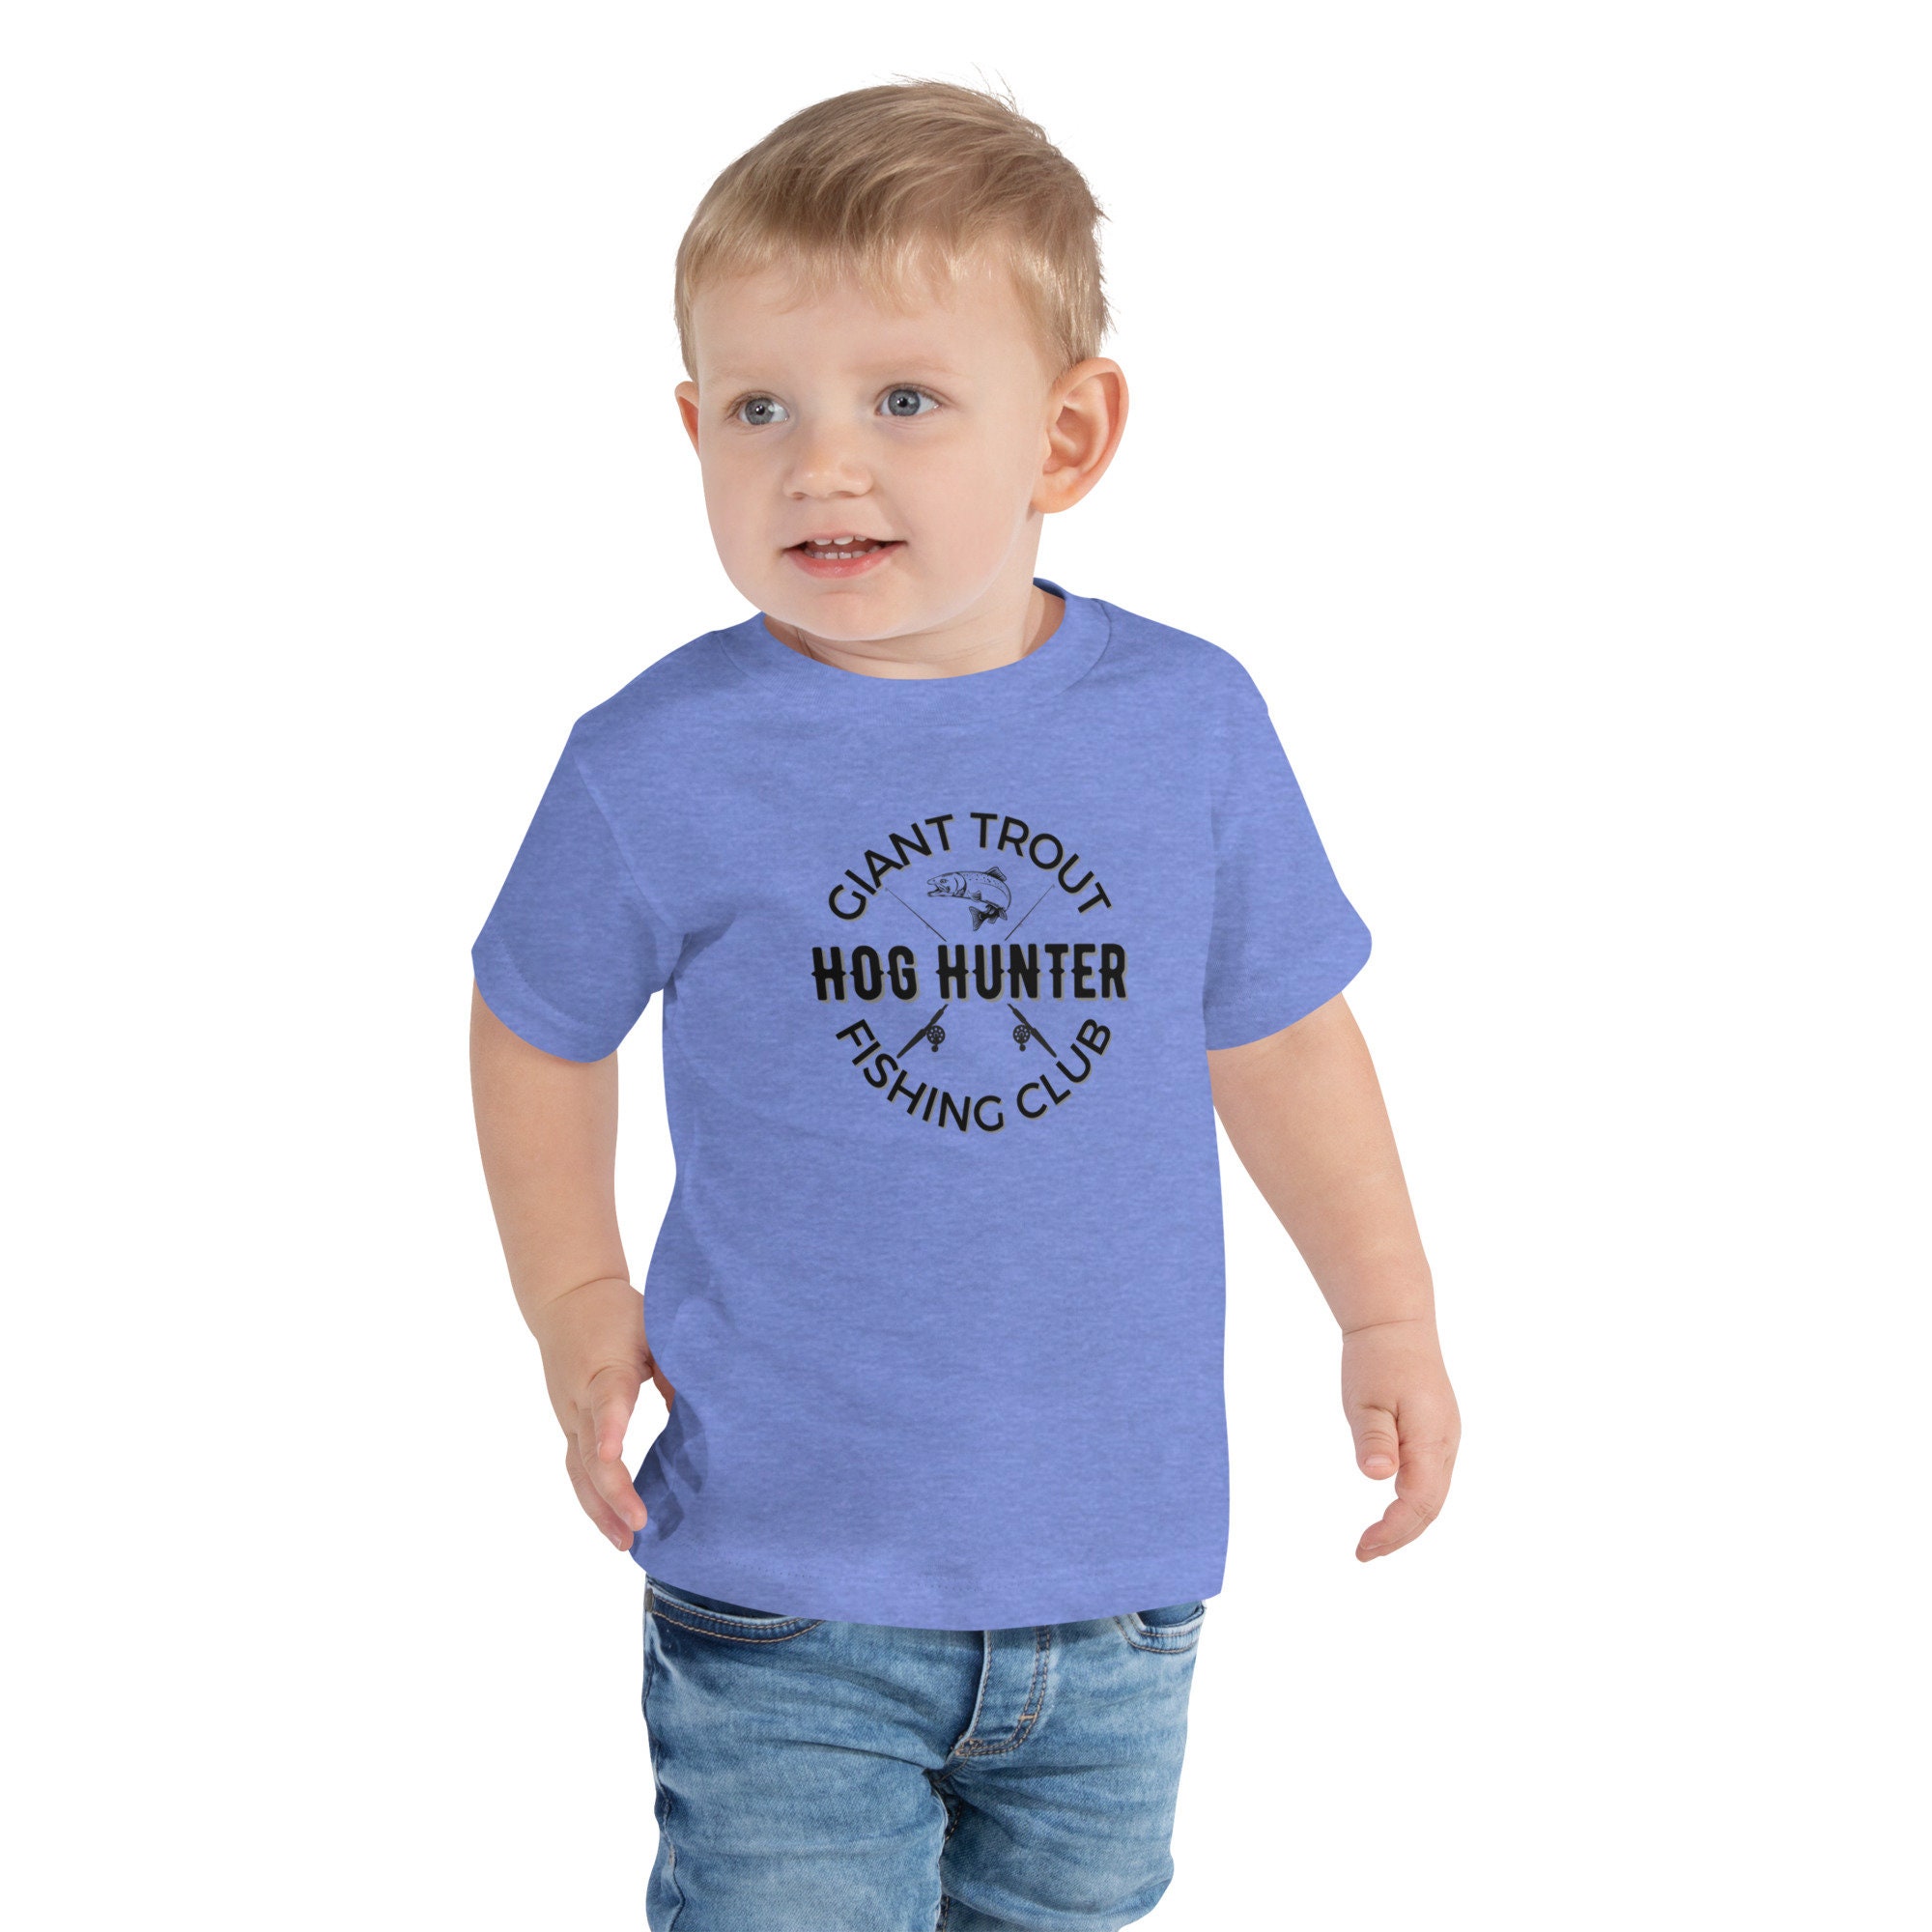 Toddler Short Sleeve Tee - Giant Trout Fishing Club Fly Fishing Shirt